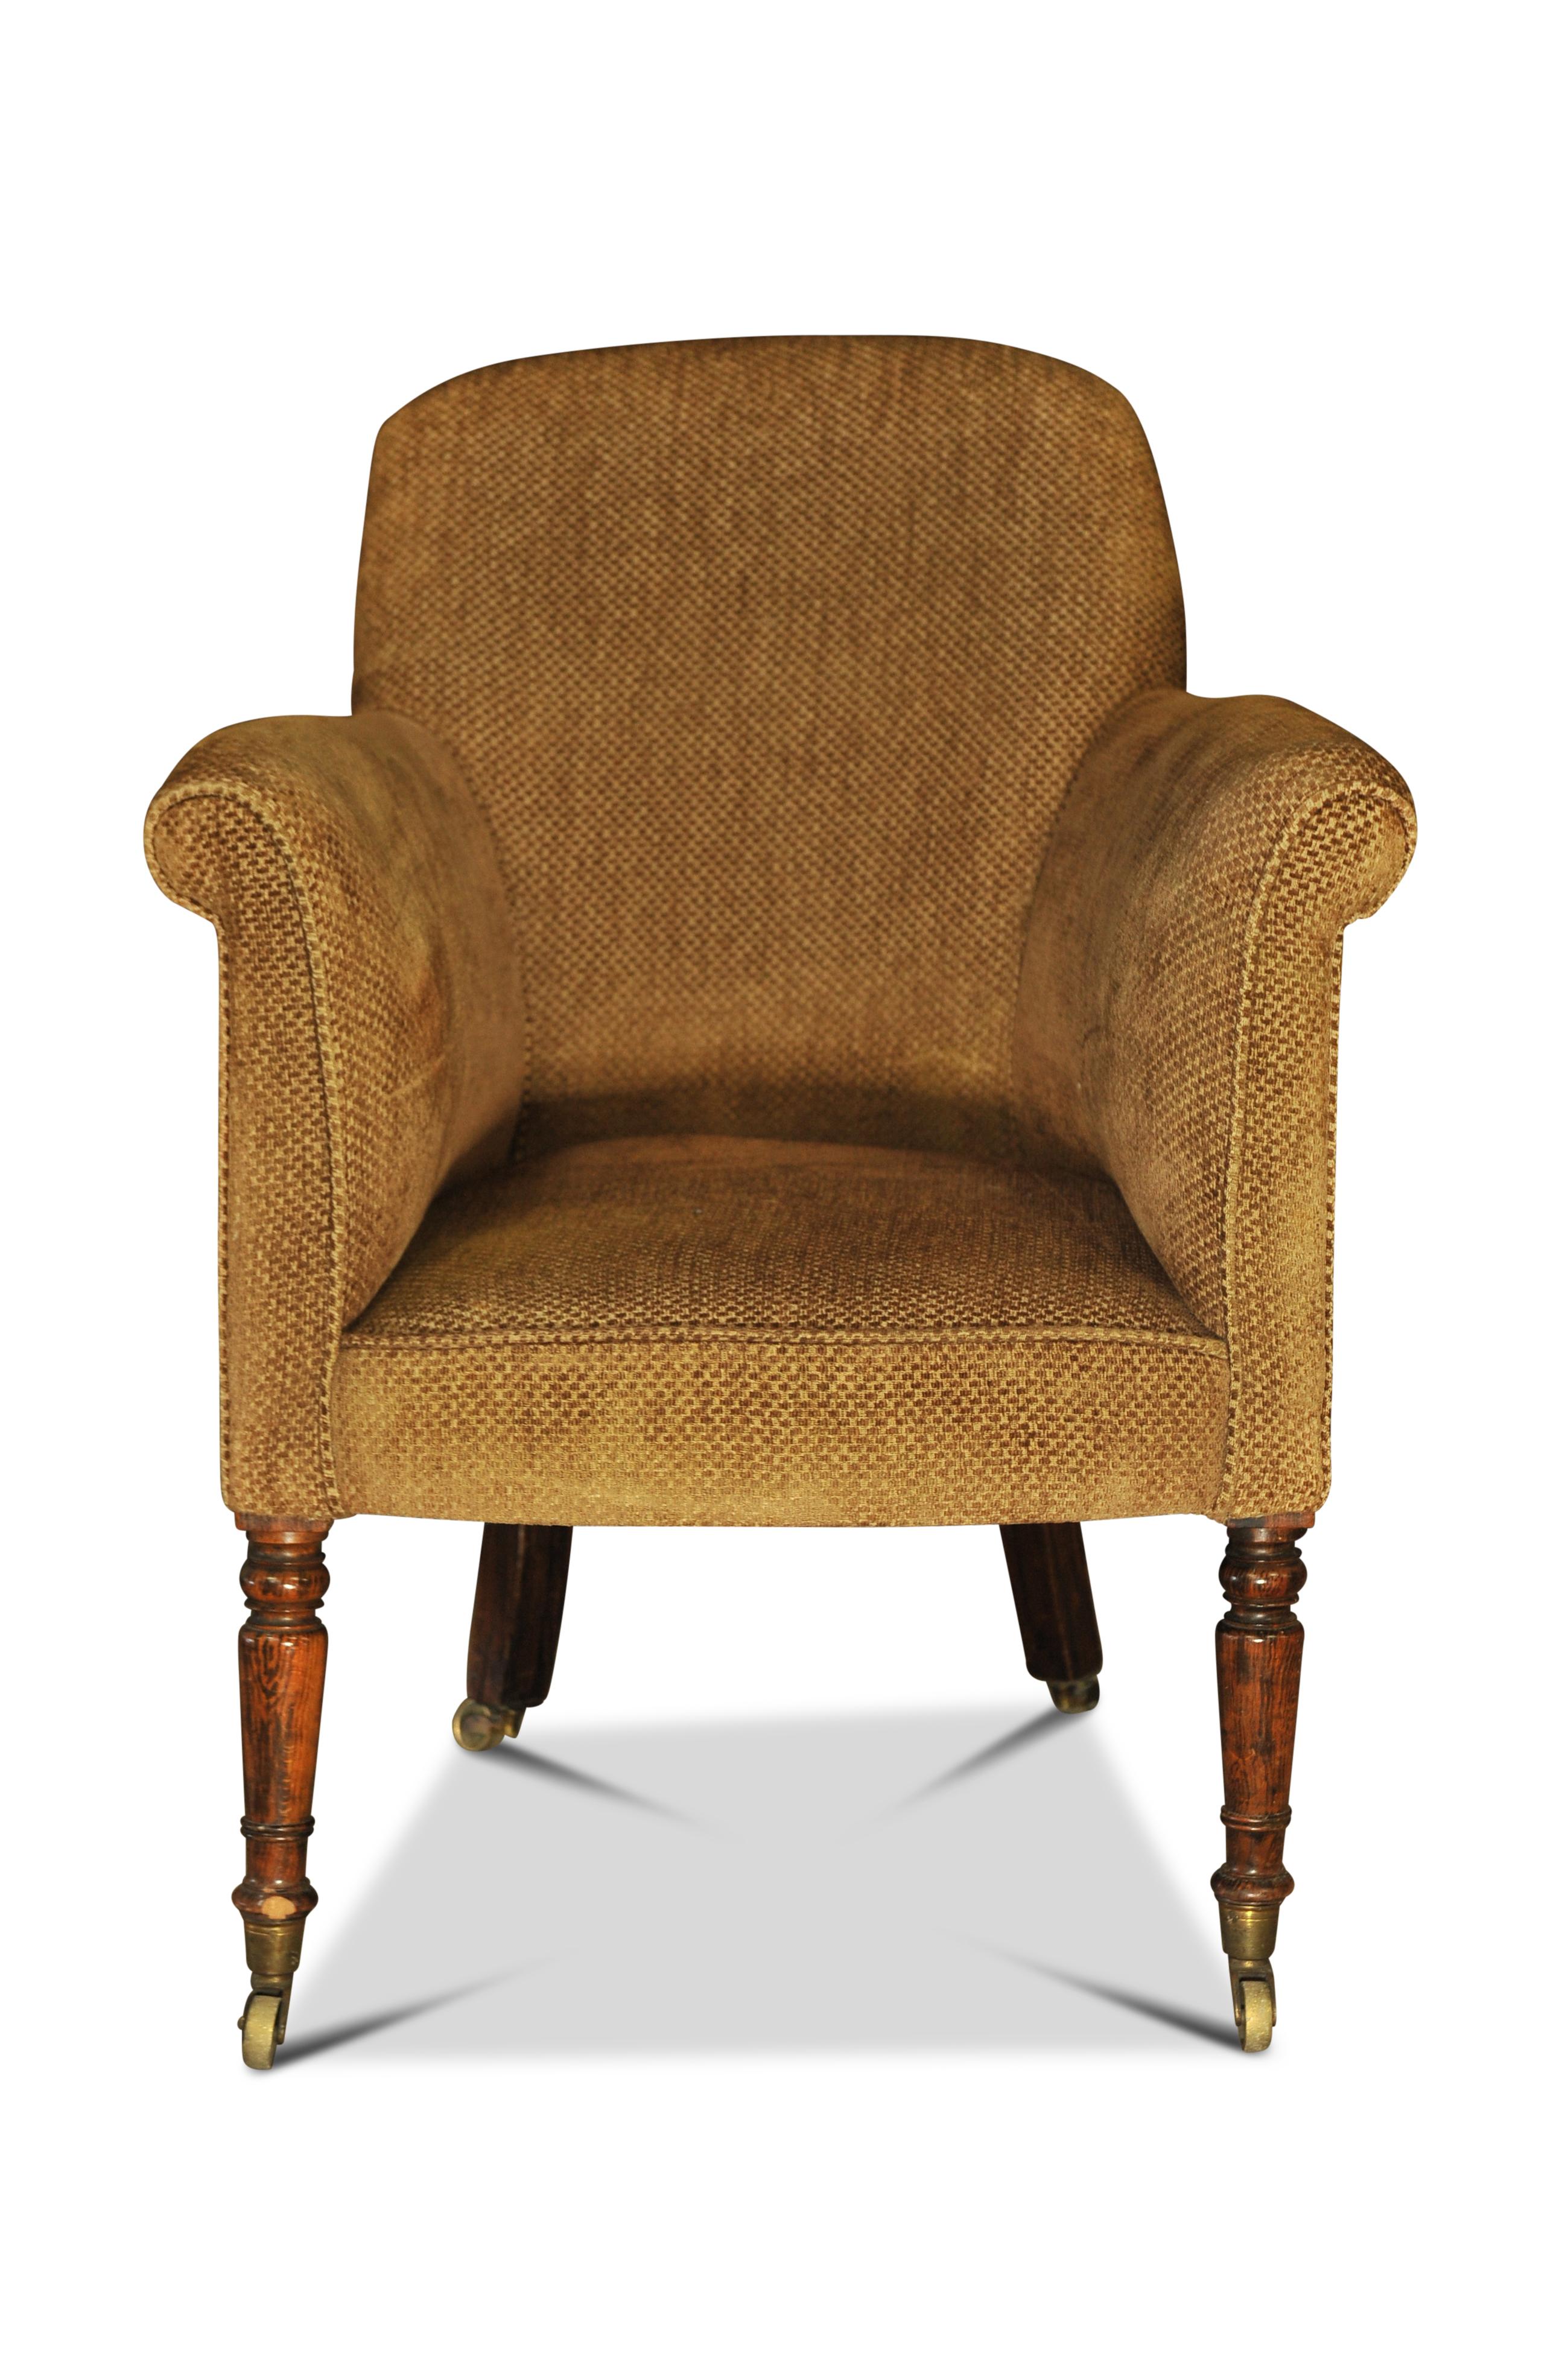 19th Century William IV Tub Chair On Brass Castors, Sabre Legs & Chenille Finish In Good Condition For Sale In High Wycombe, GB